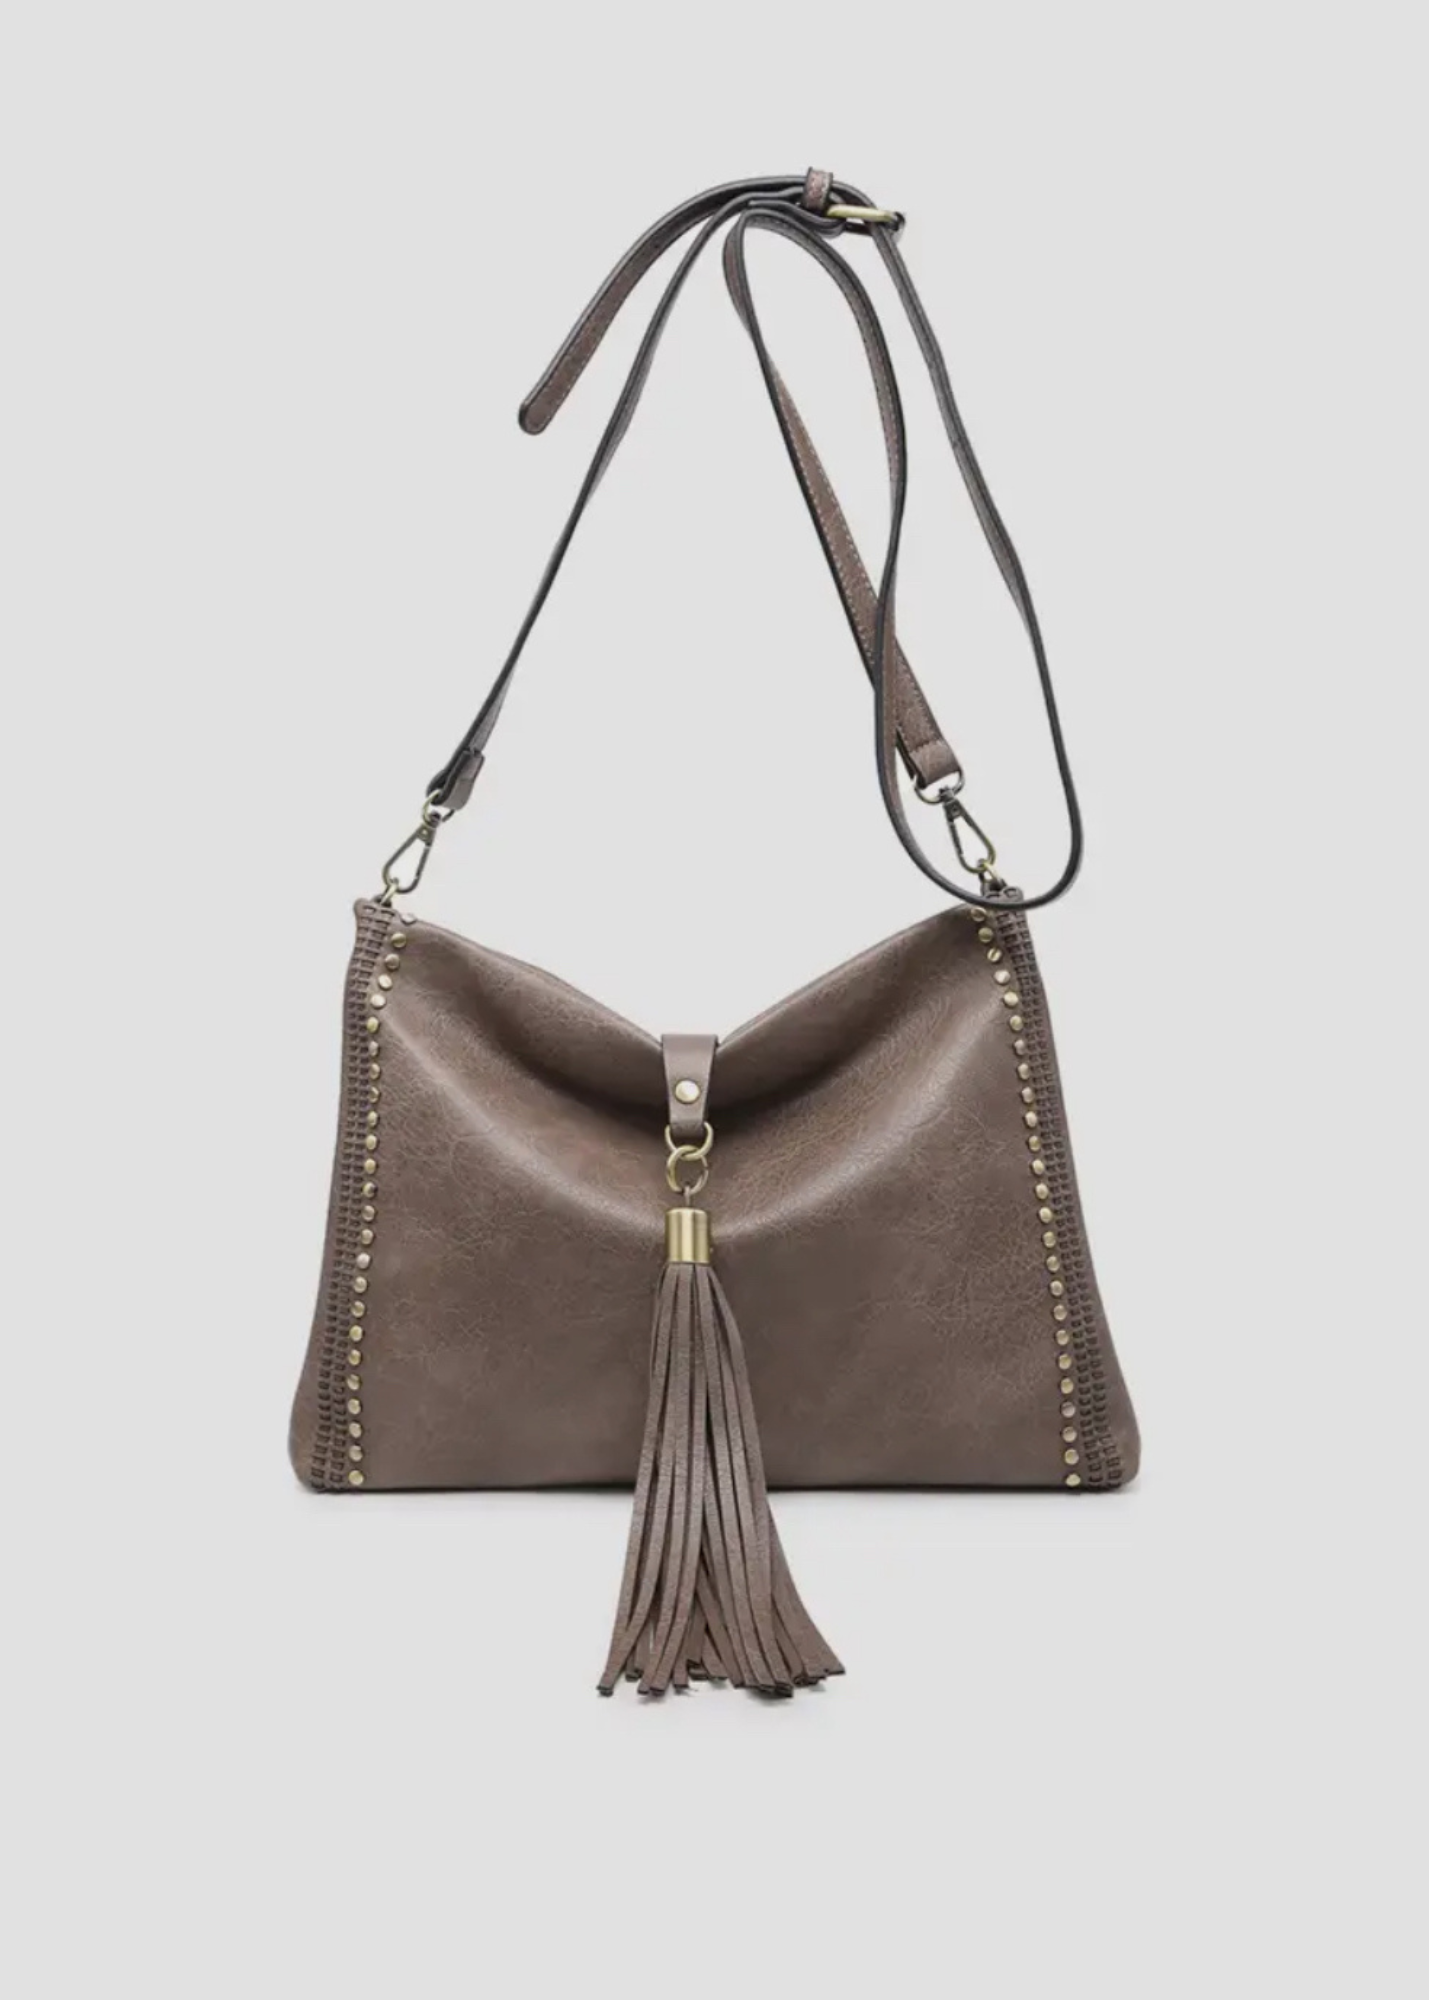 Coco color  purse made of soft vegan leather. Purse is rectangular with silver studs going up the sides and a ling tassel wit silver hardware that folds over the top to close purse. Strap is crossbody length and is adjustable. 